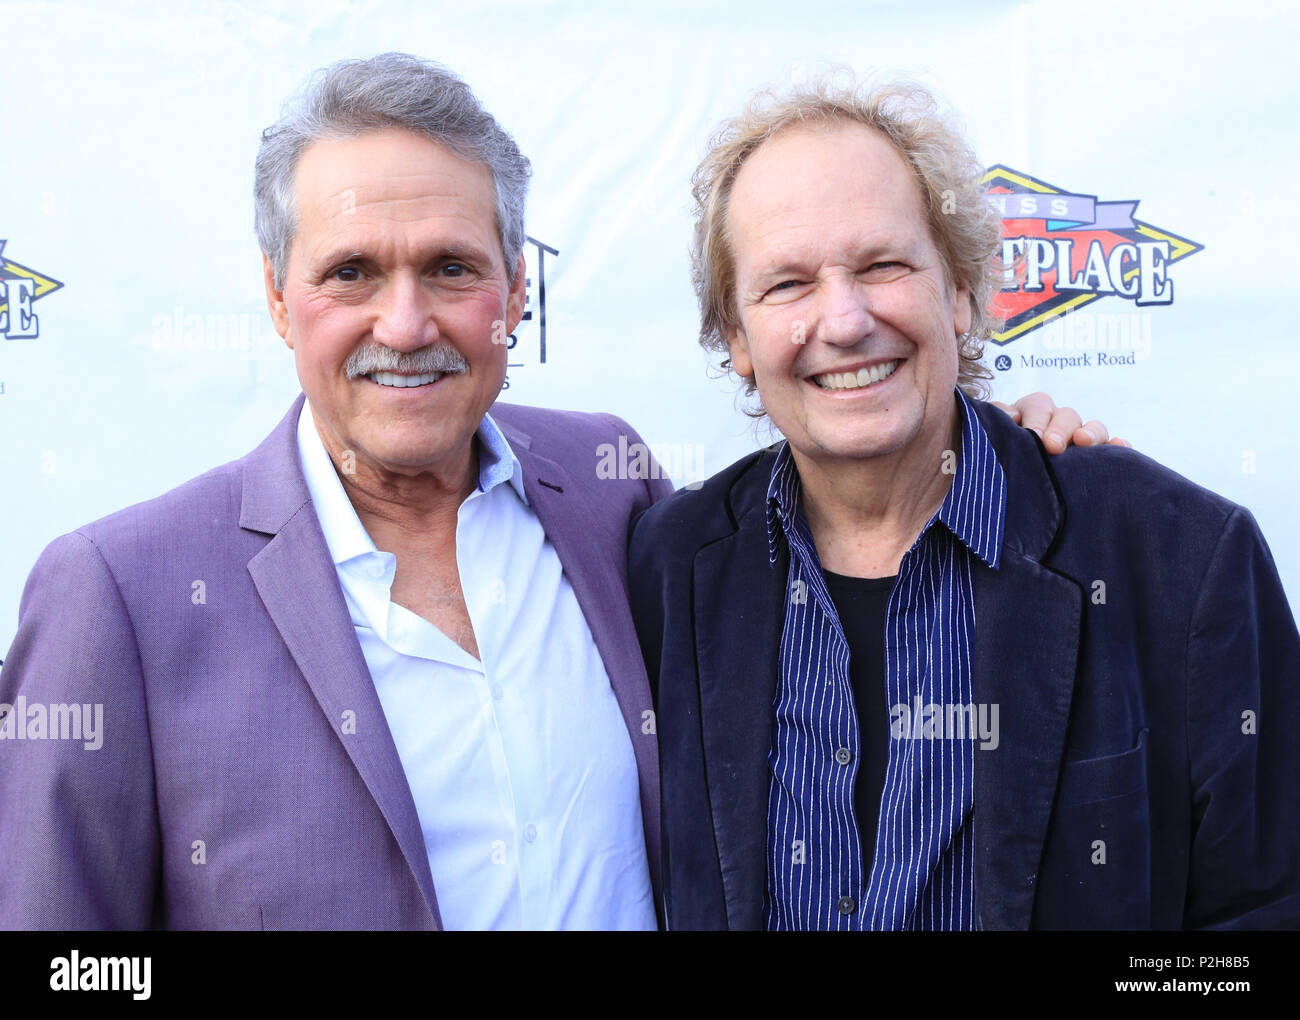 Shelter Hope Pet Shop's first annual fundraiser gala and rescue me award  ceremony Featuring: Joel Sill, Lee Ritenour Where: Malibu, California,  United States When: 12 May 2018 Credit: WENN.com Stock Photo - Alamy